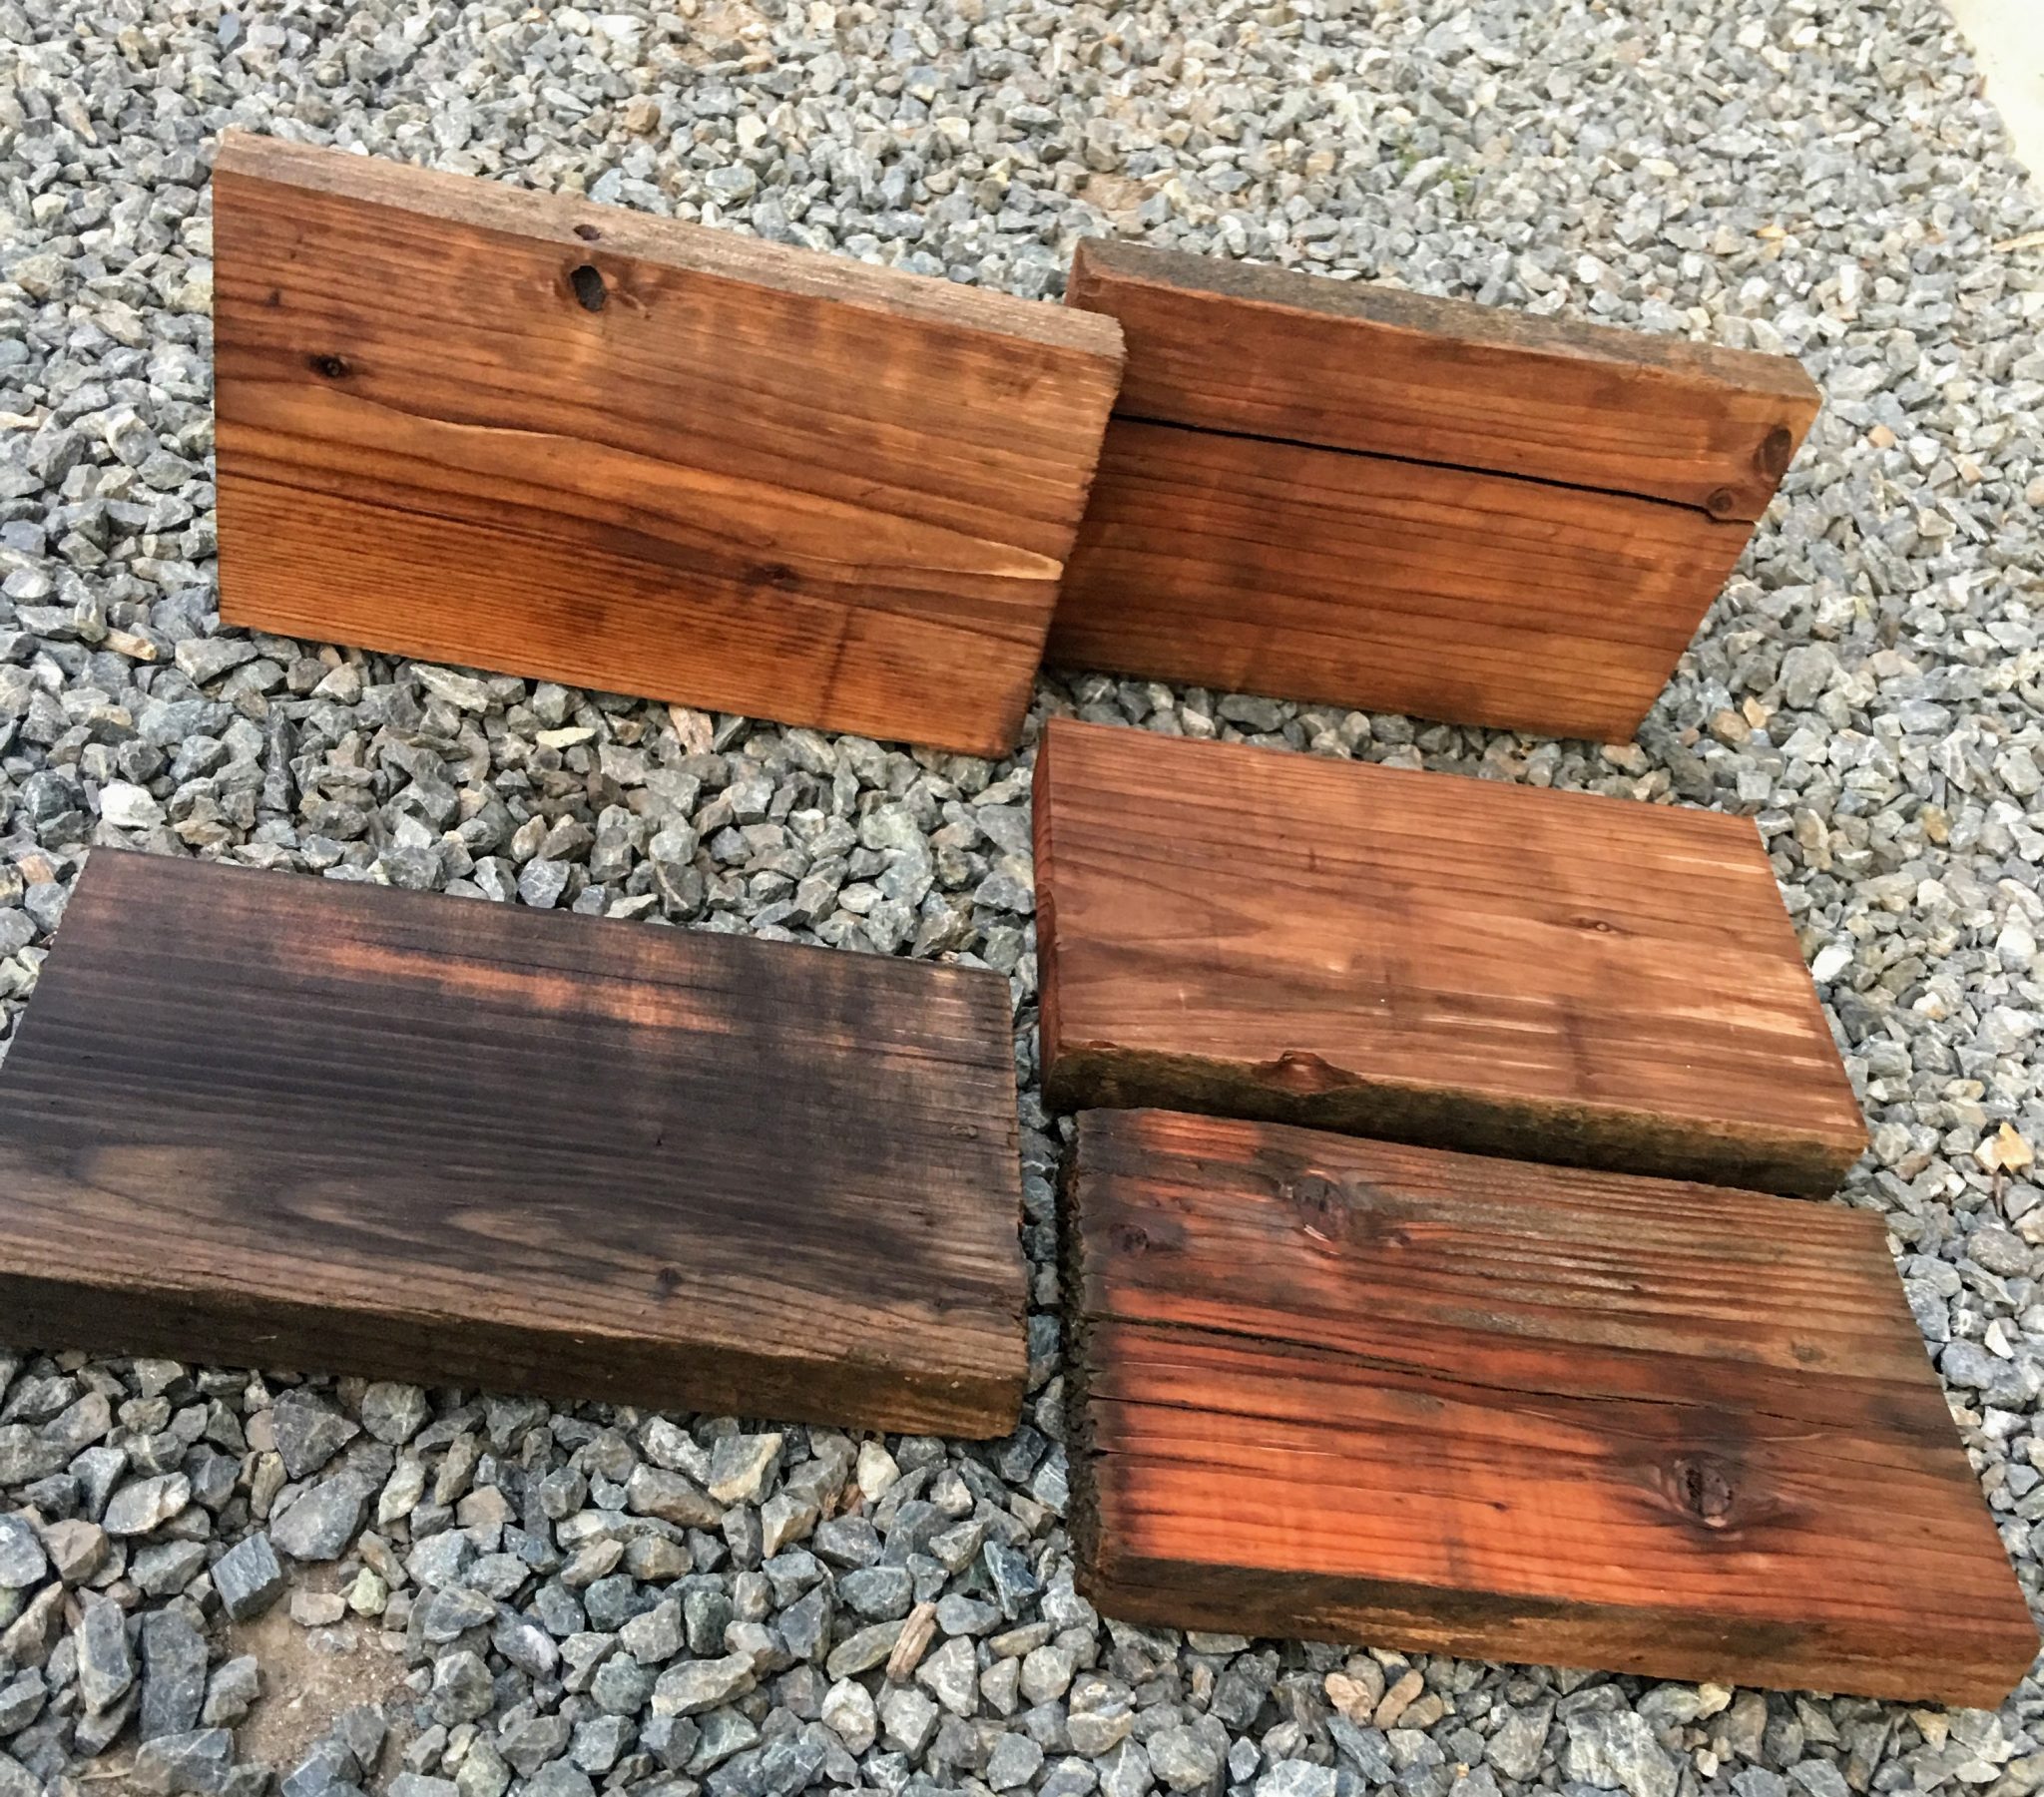 Package of 5 Reclaimed Redwood Boards 1111 1/2" x 7 1/4" x 1 3/8